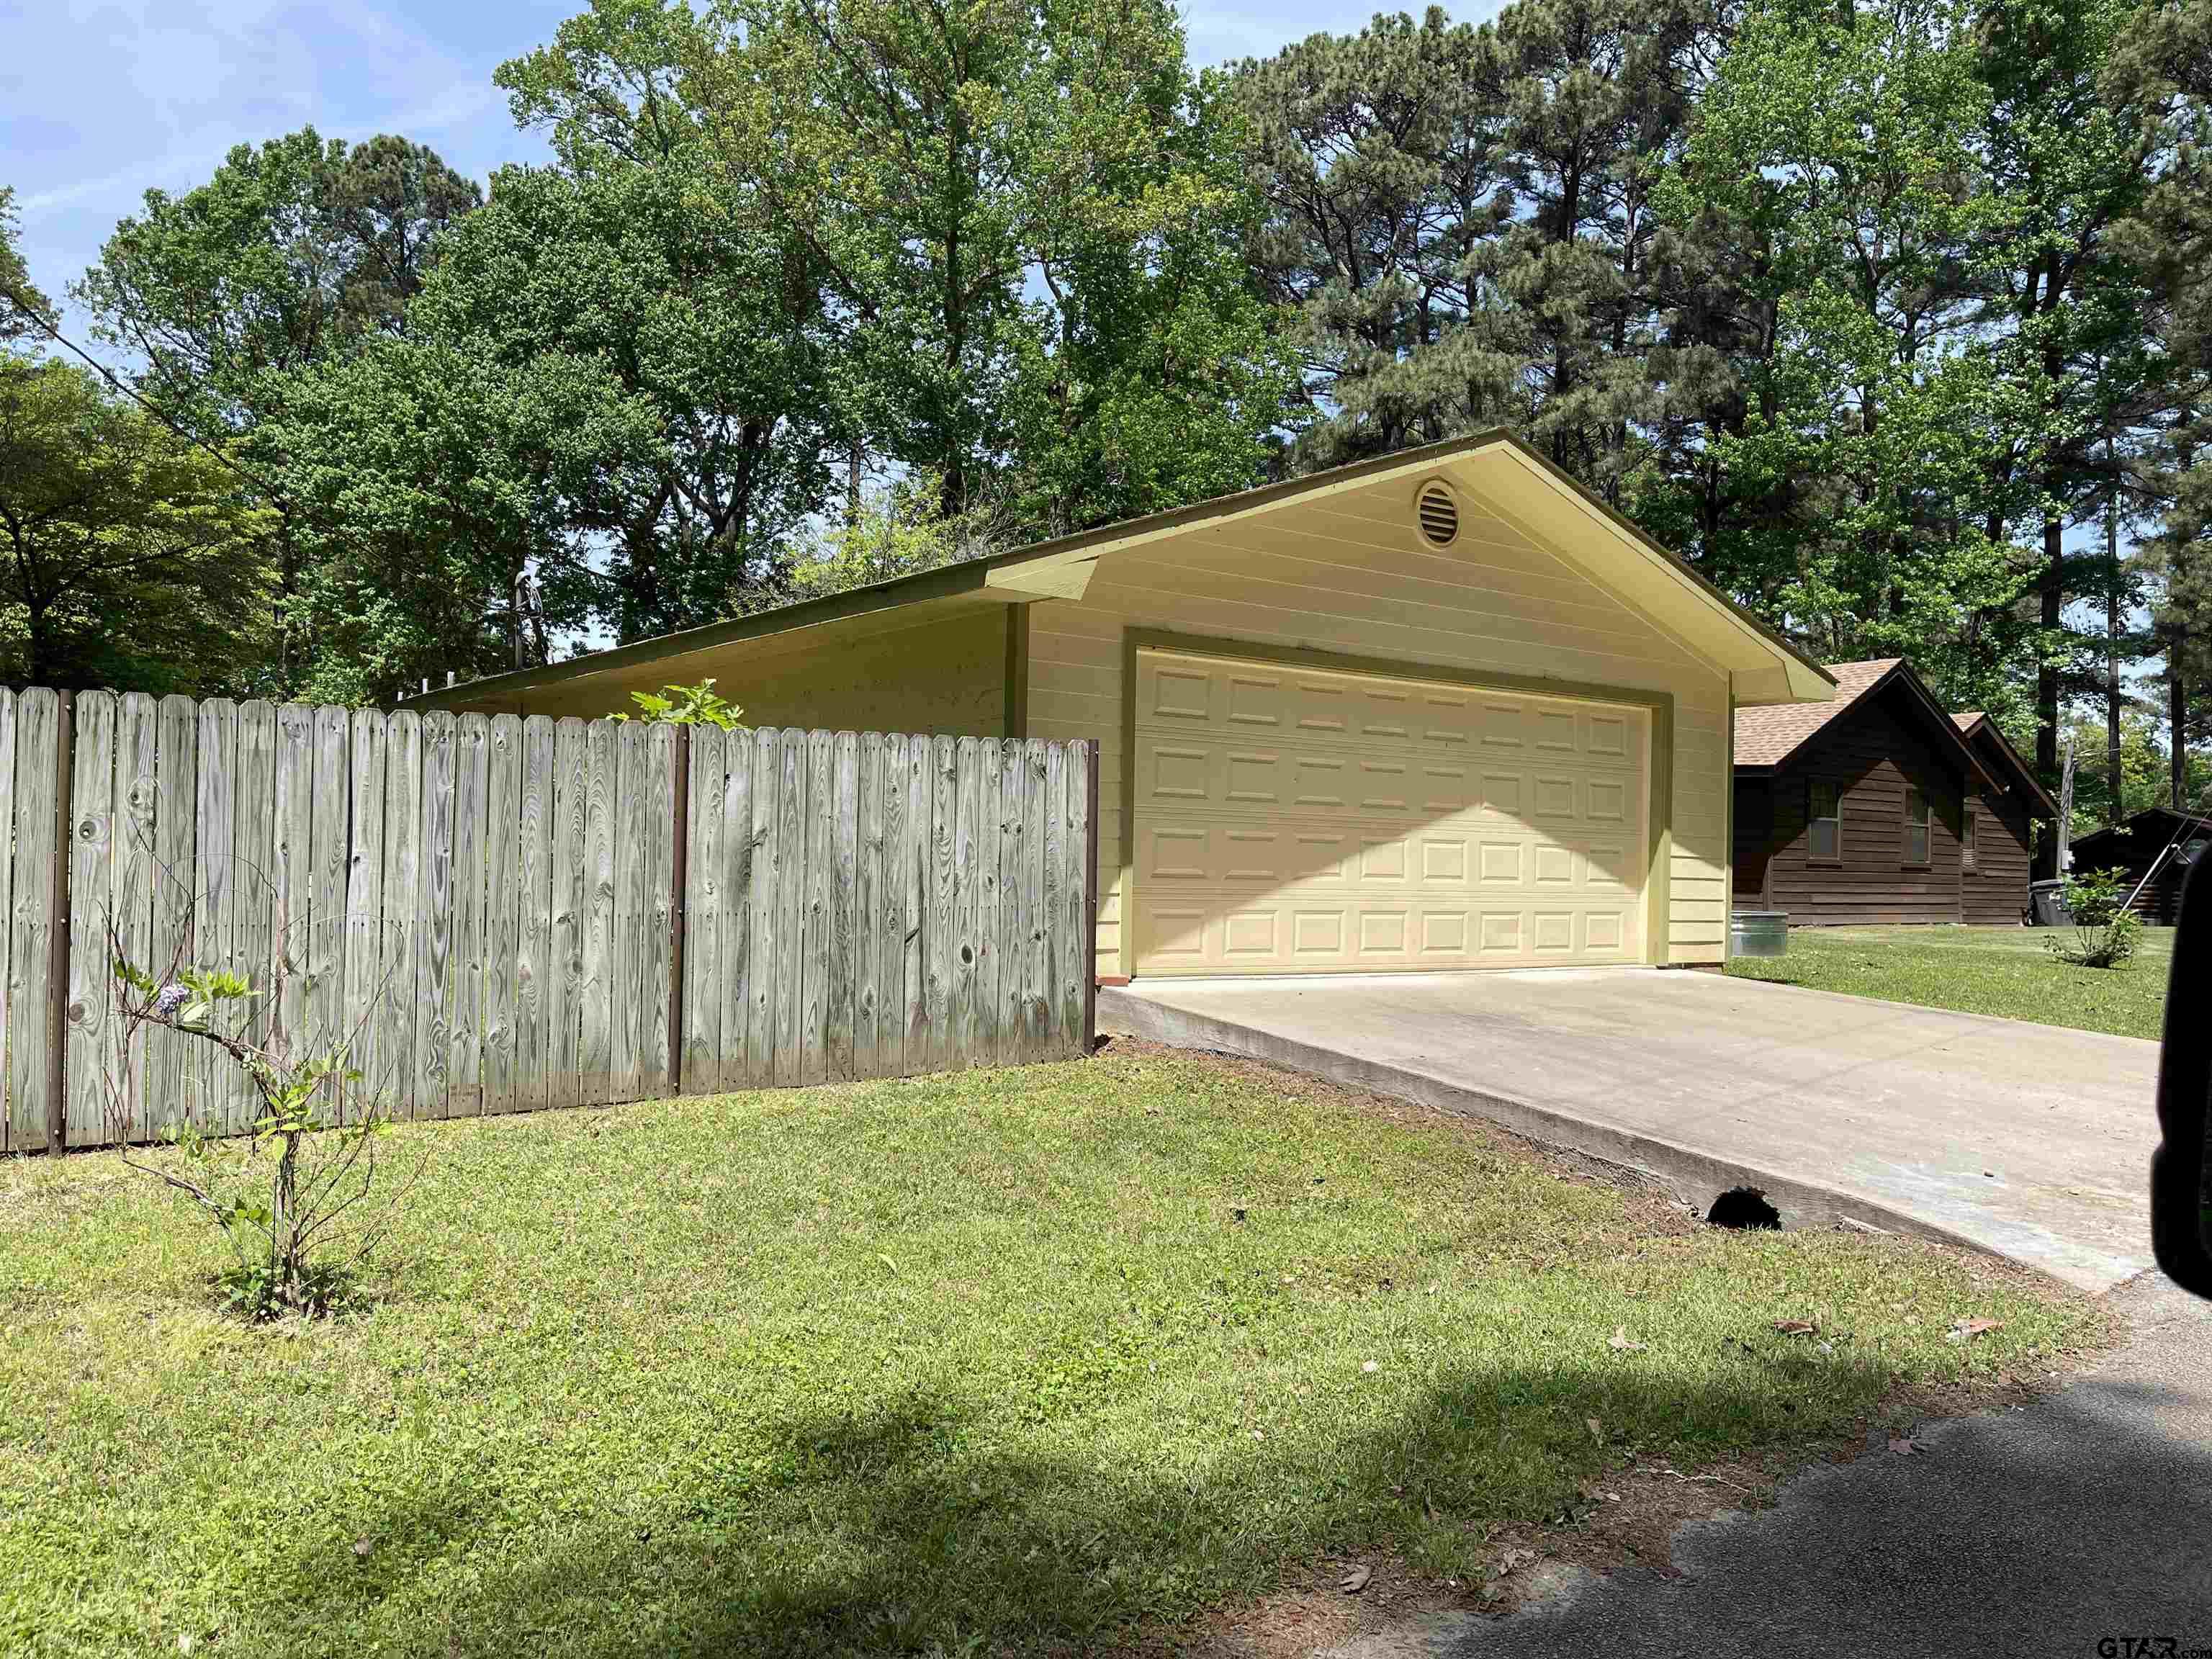 275 Lake Drive, Mt Vernon, Texas 75457, 3 Bedrooms Bedrooms, ,2 BathroomsBathrooms,Single Family Detached,For Sale,Lake Drive,23009595